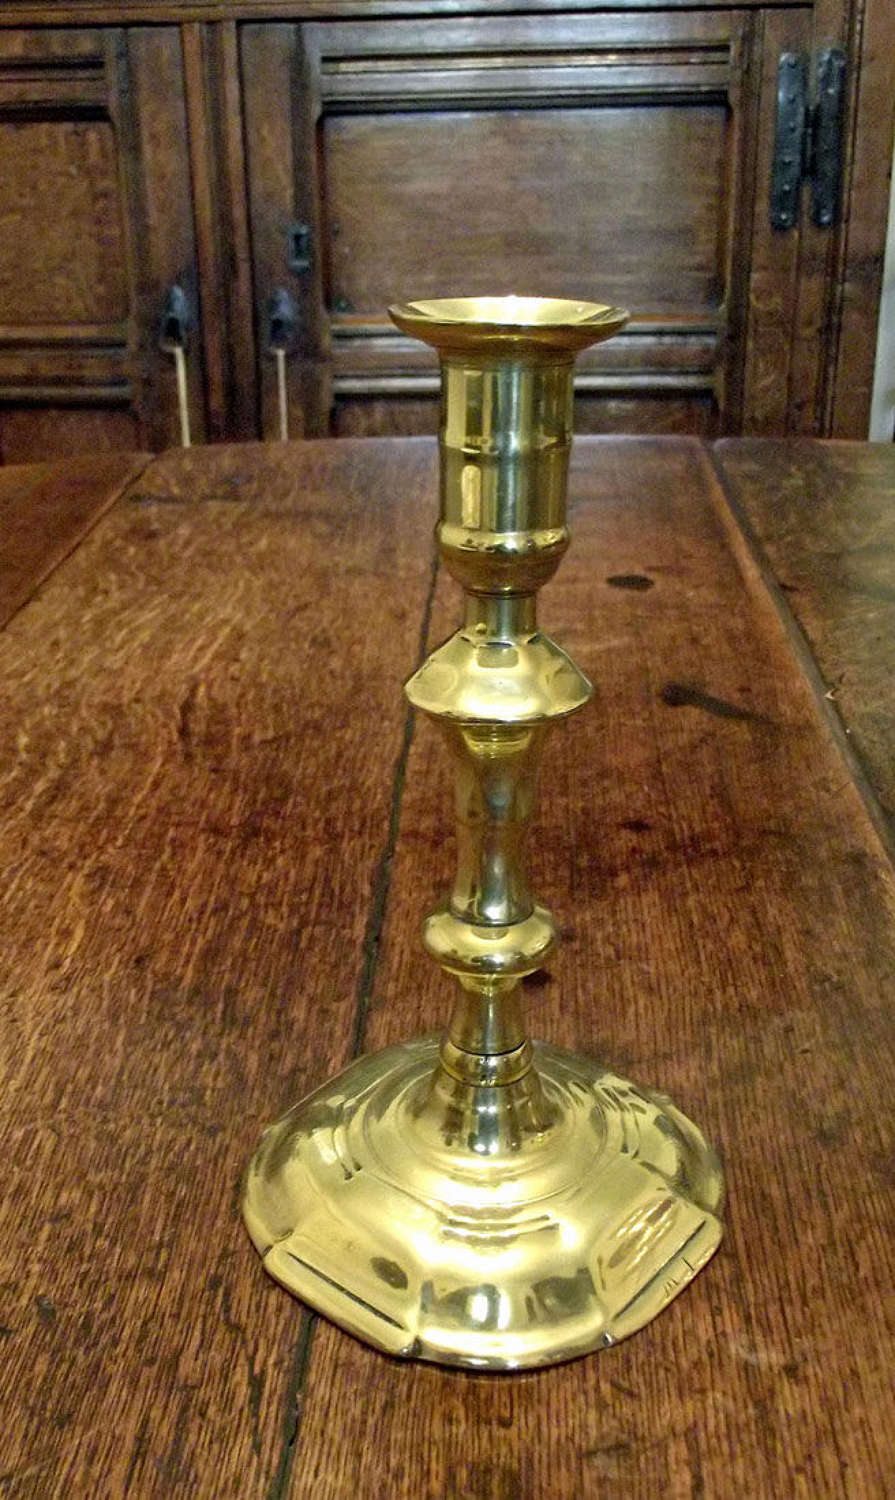 Antique Metalware 18thc Named & Initialled Brass Candlestick. English.